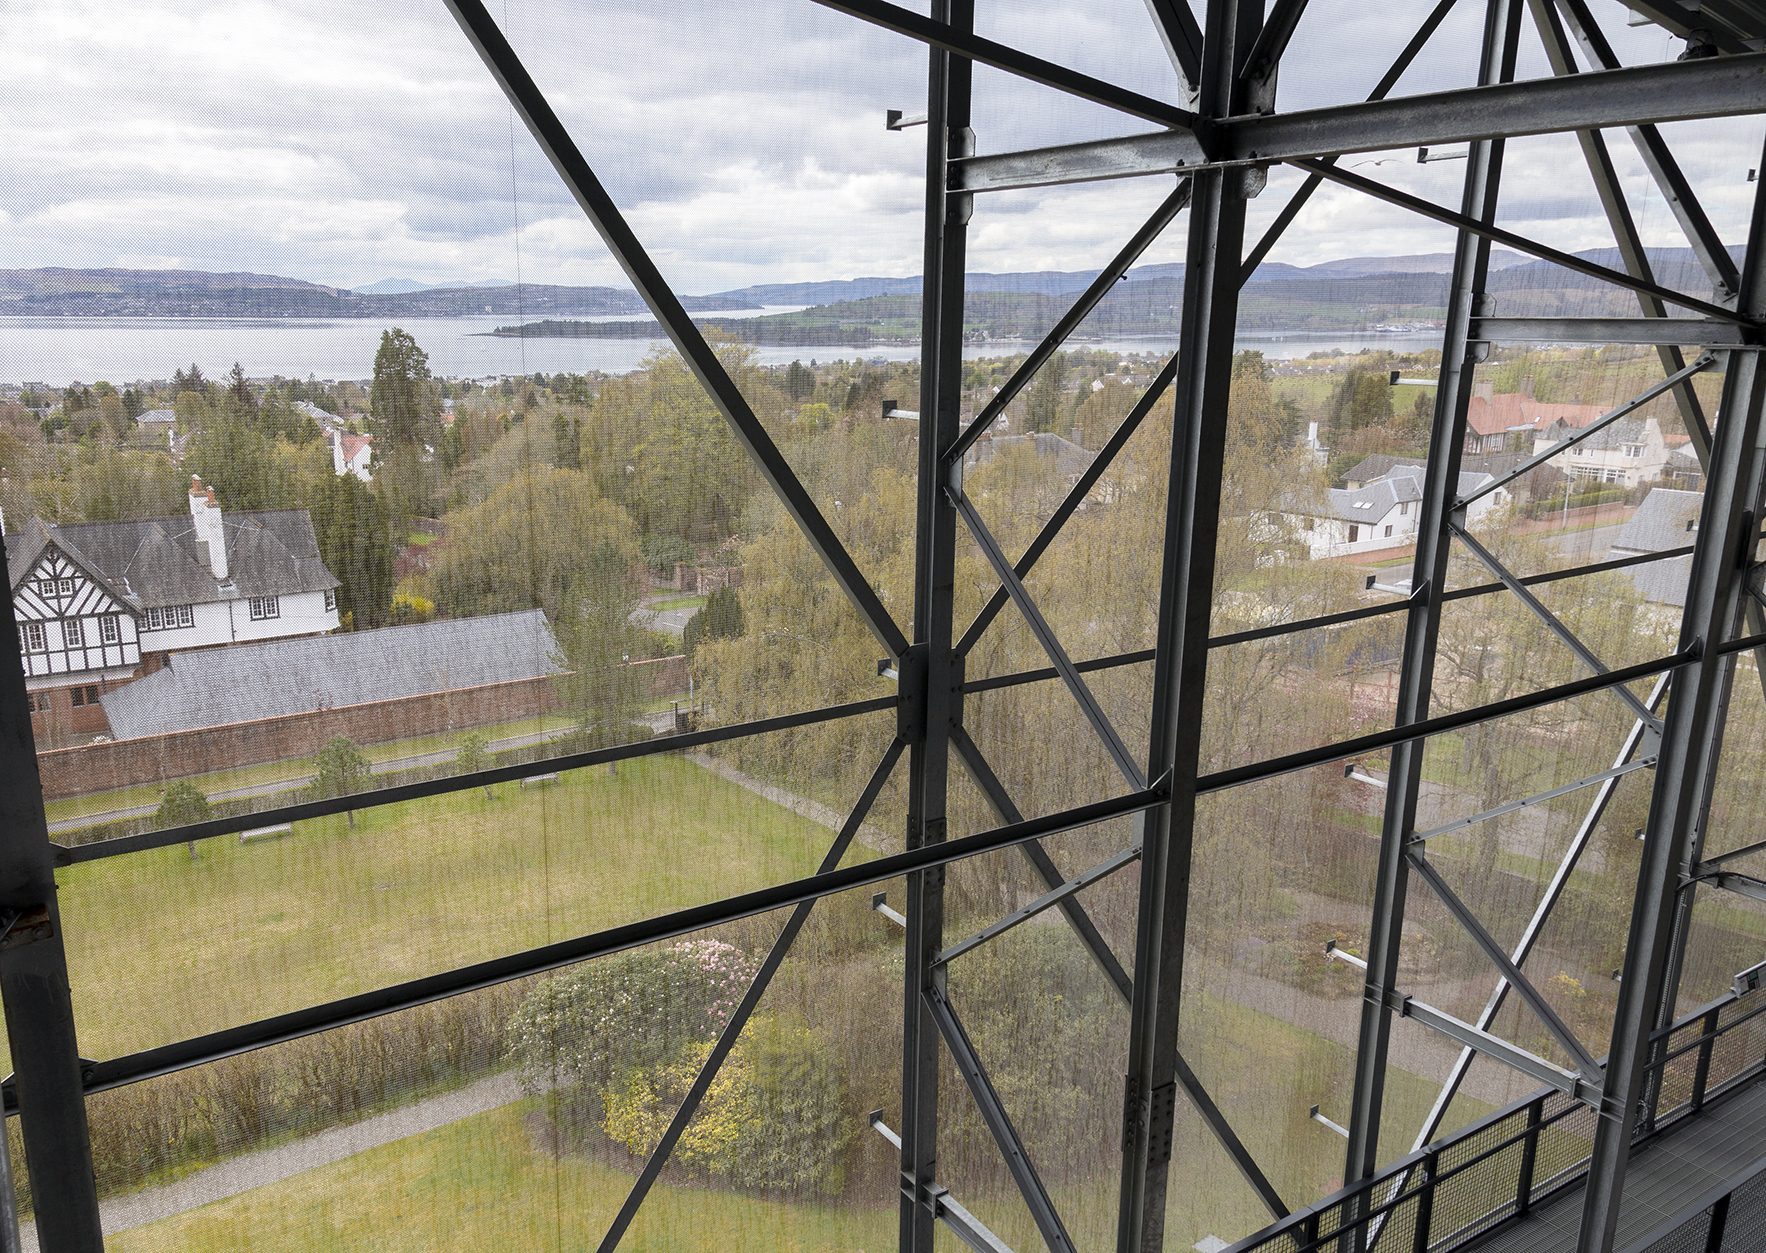 The Box has opened up new views across Helensburgh to the Firth of Clyde beyond